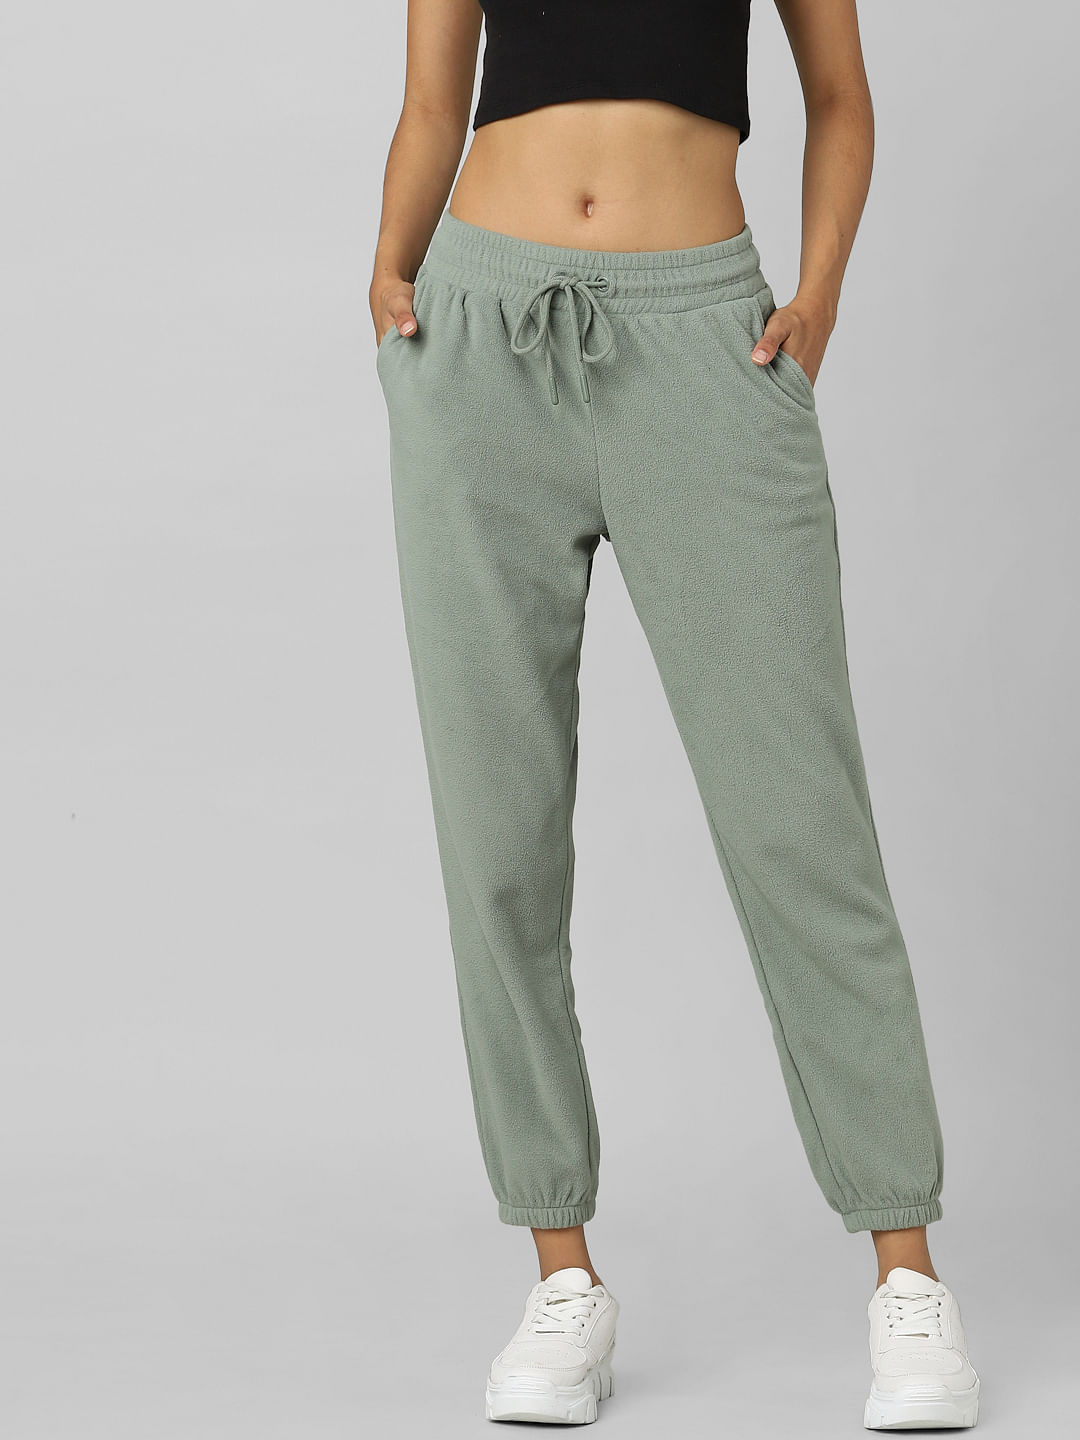 All In Motion Women's Olive Green High-Rise Ribbed Jogger Pants NWT | eBay